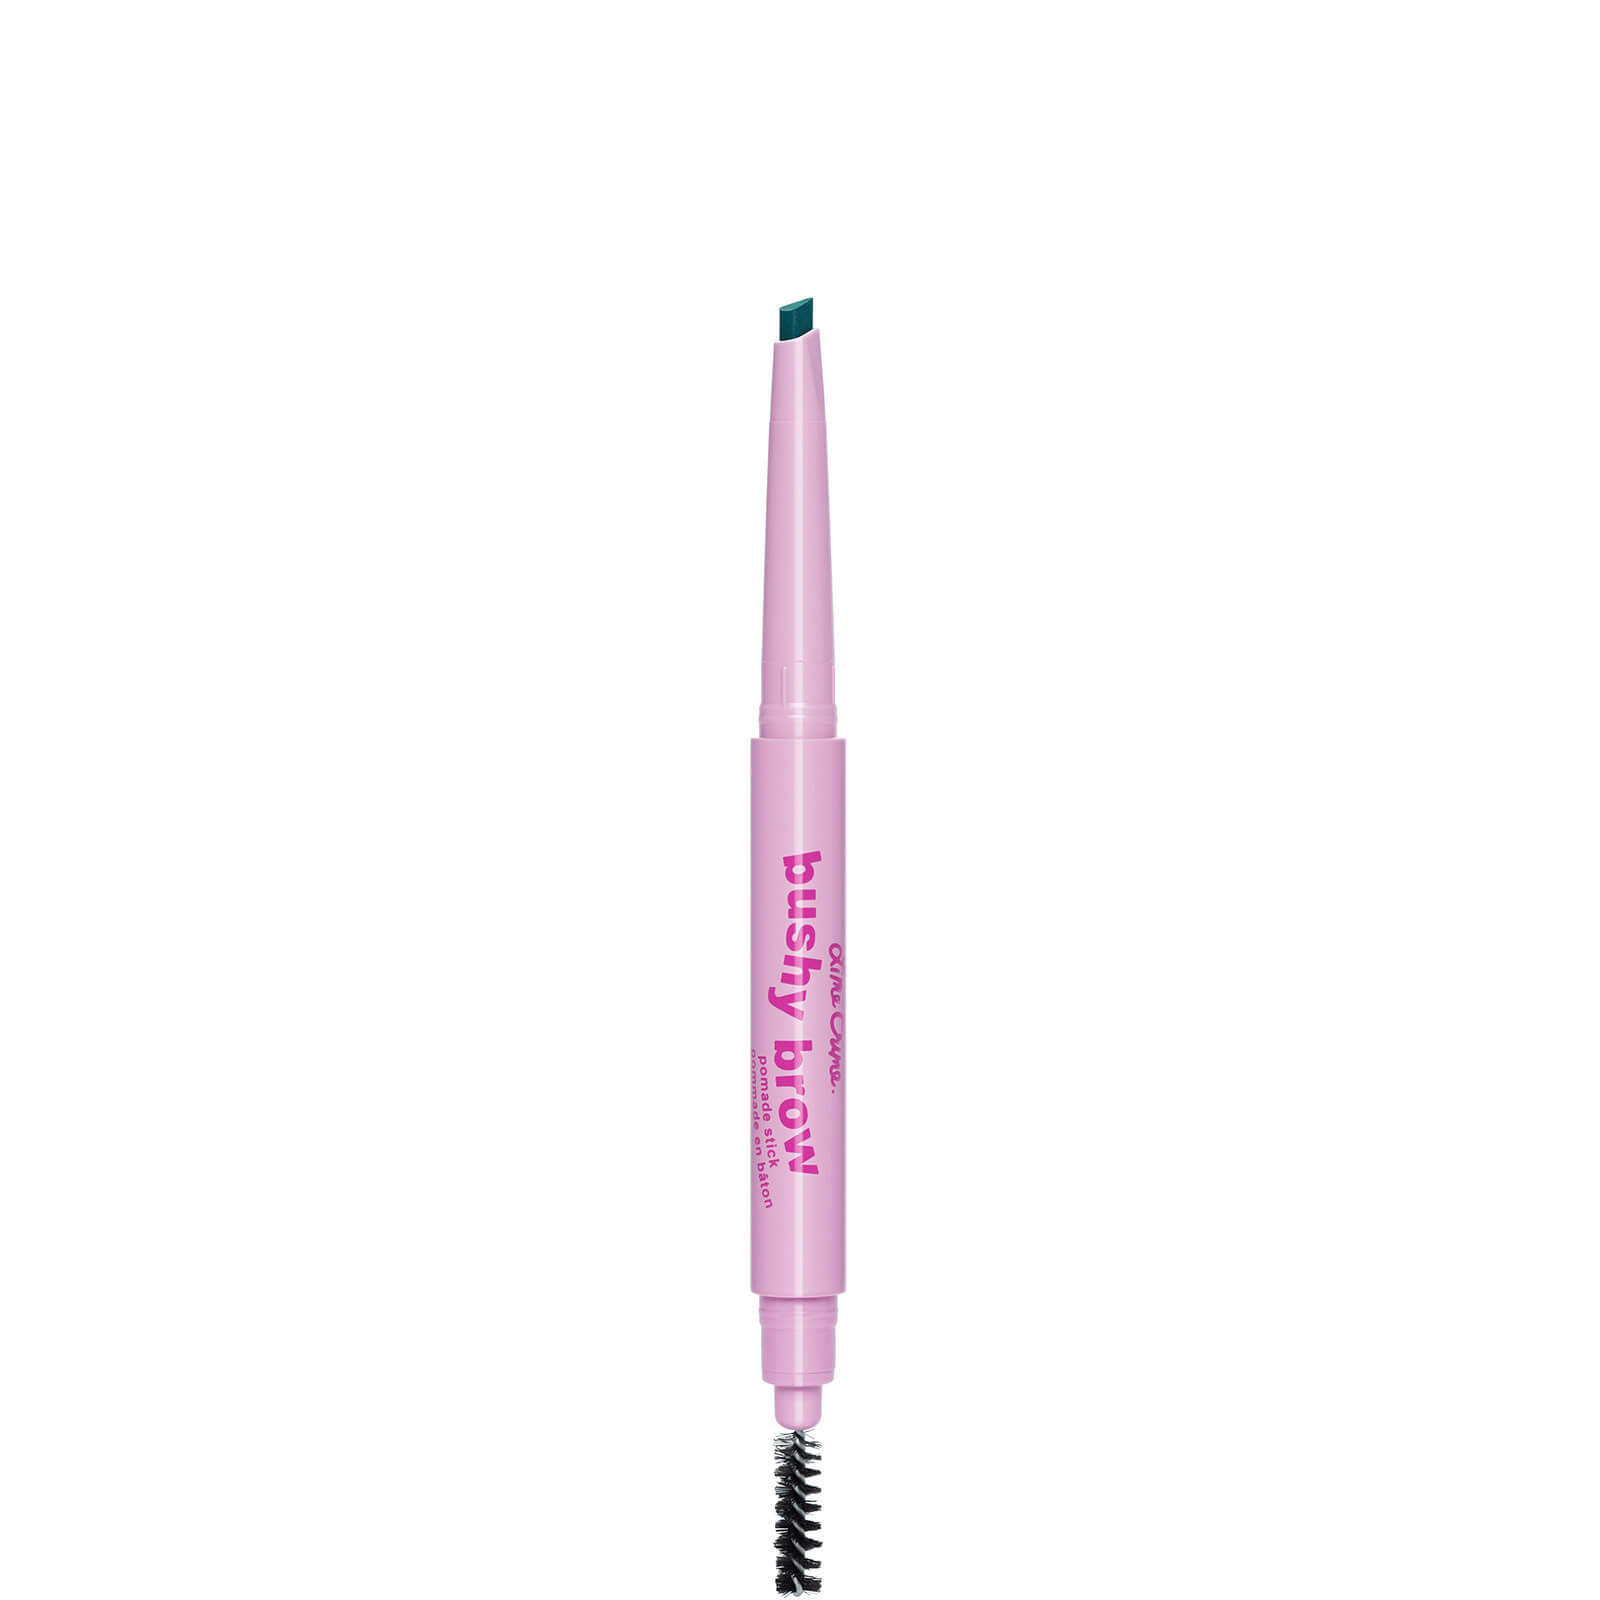 Lime Crime Bushy Brow Pomade Stick 11g (Various Shades) - Sea Witch